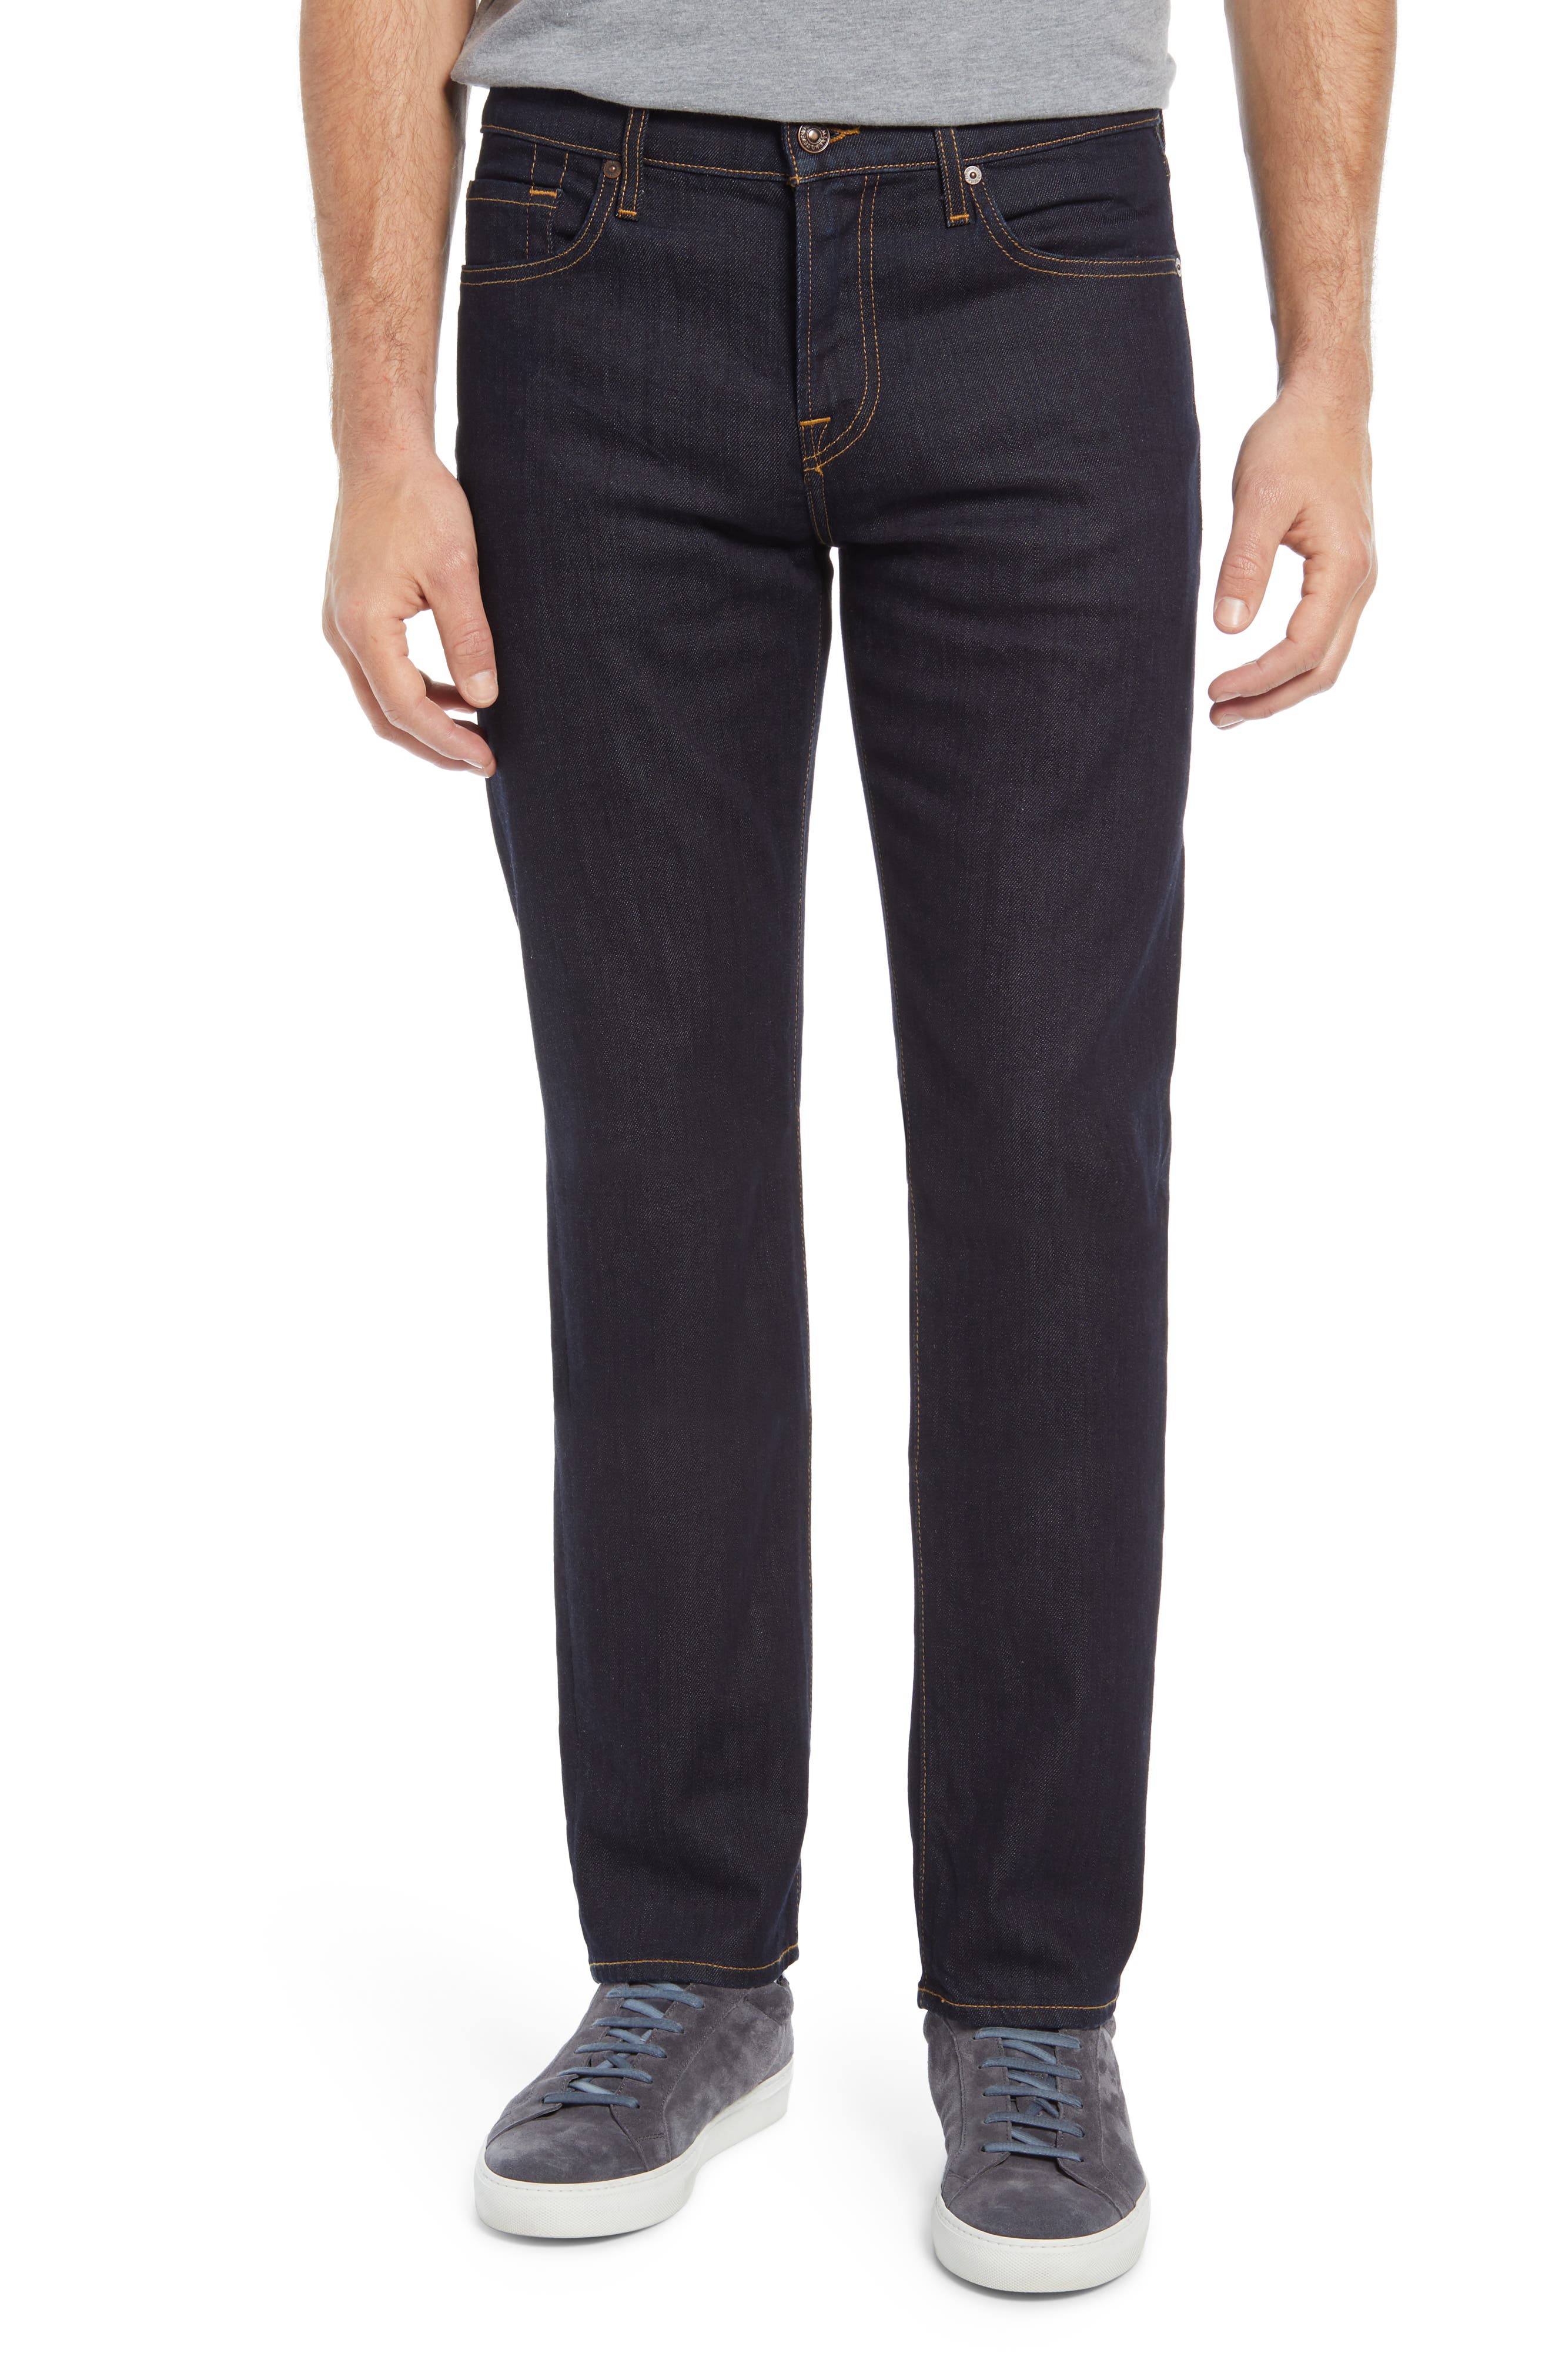 7 for all mankind long inseam